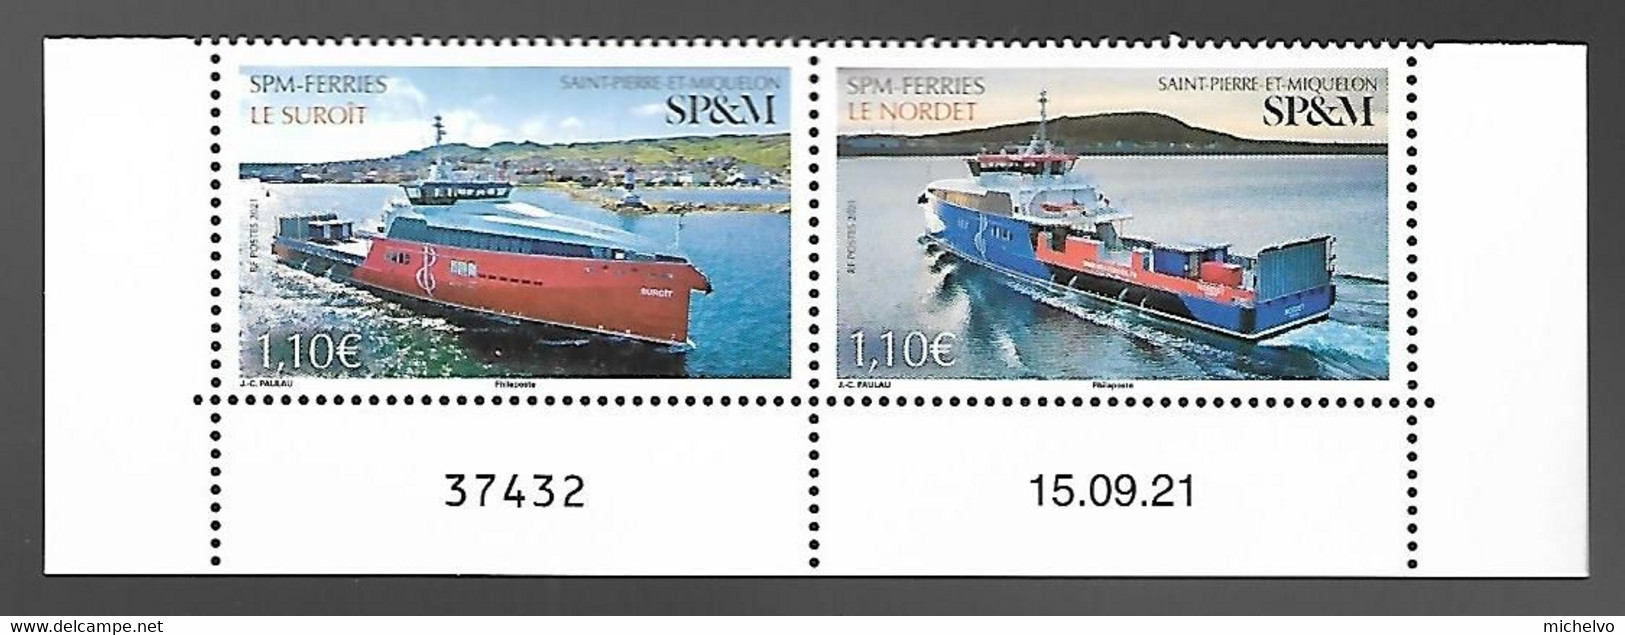 SP & M 2021 - Yv N° 1272 & 1273 ** - Les Ferries (Diptyque)(coin Daté) - Unused Stamps